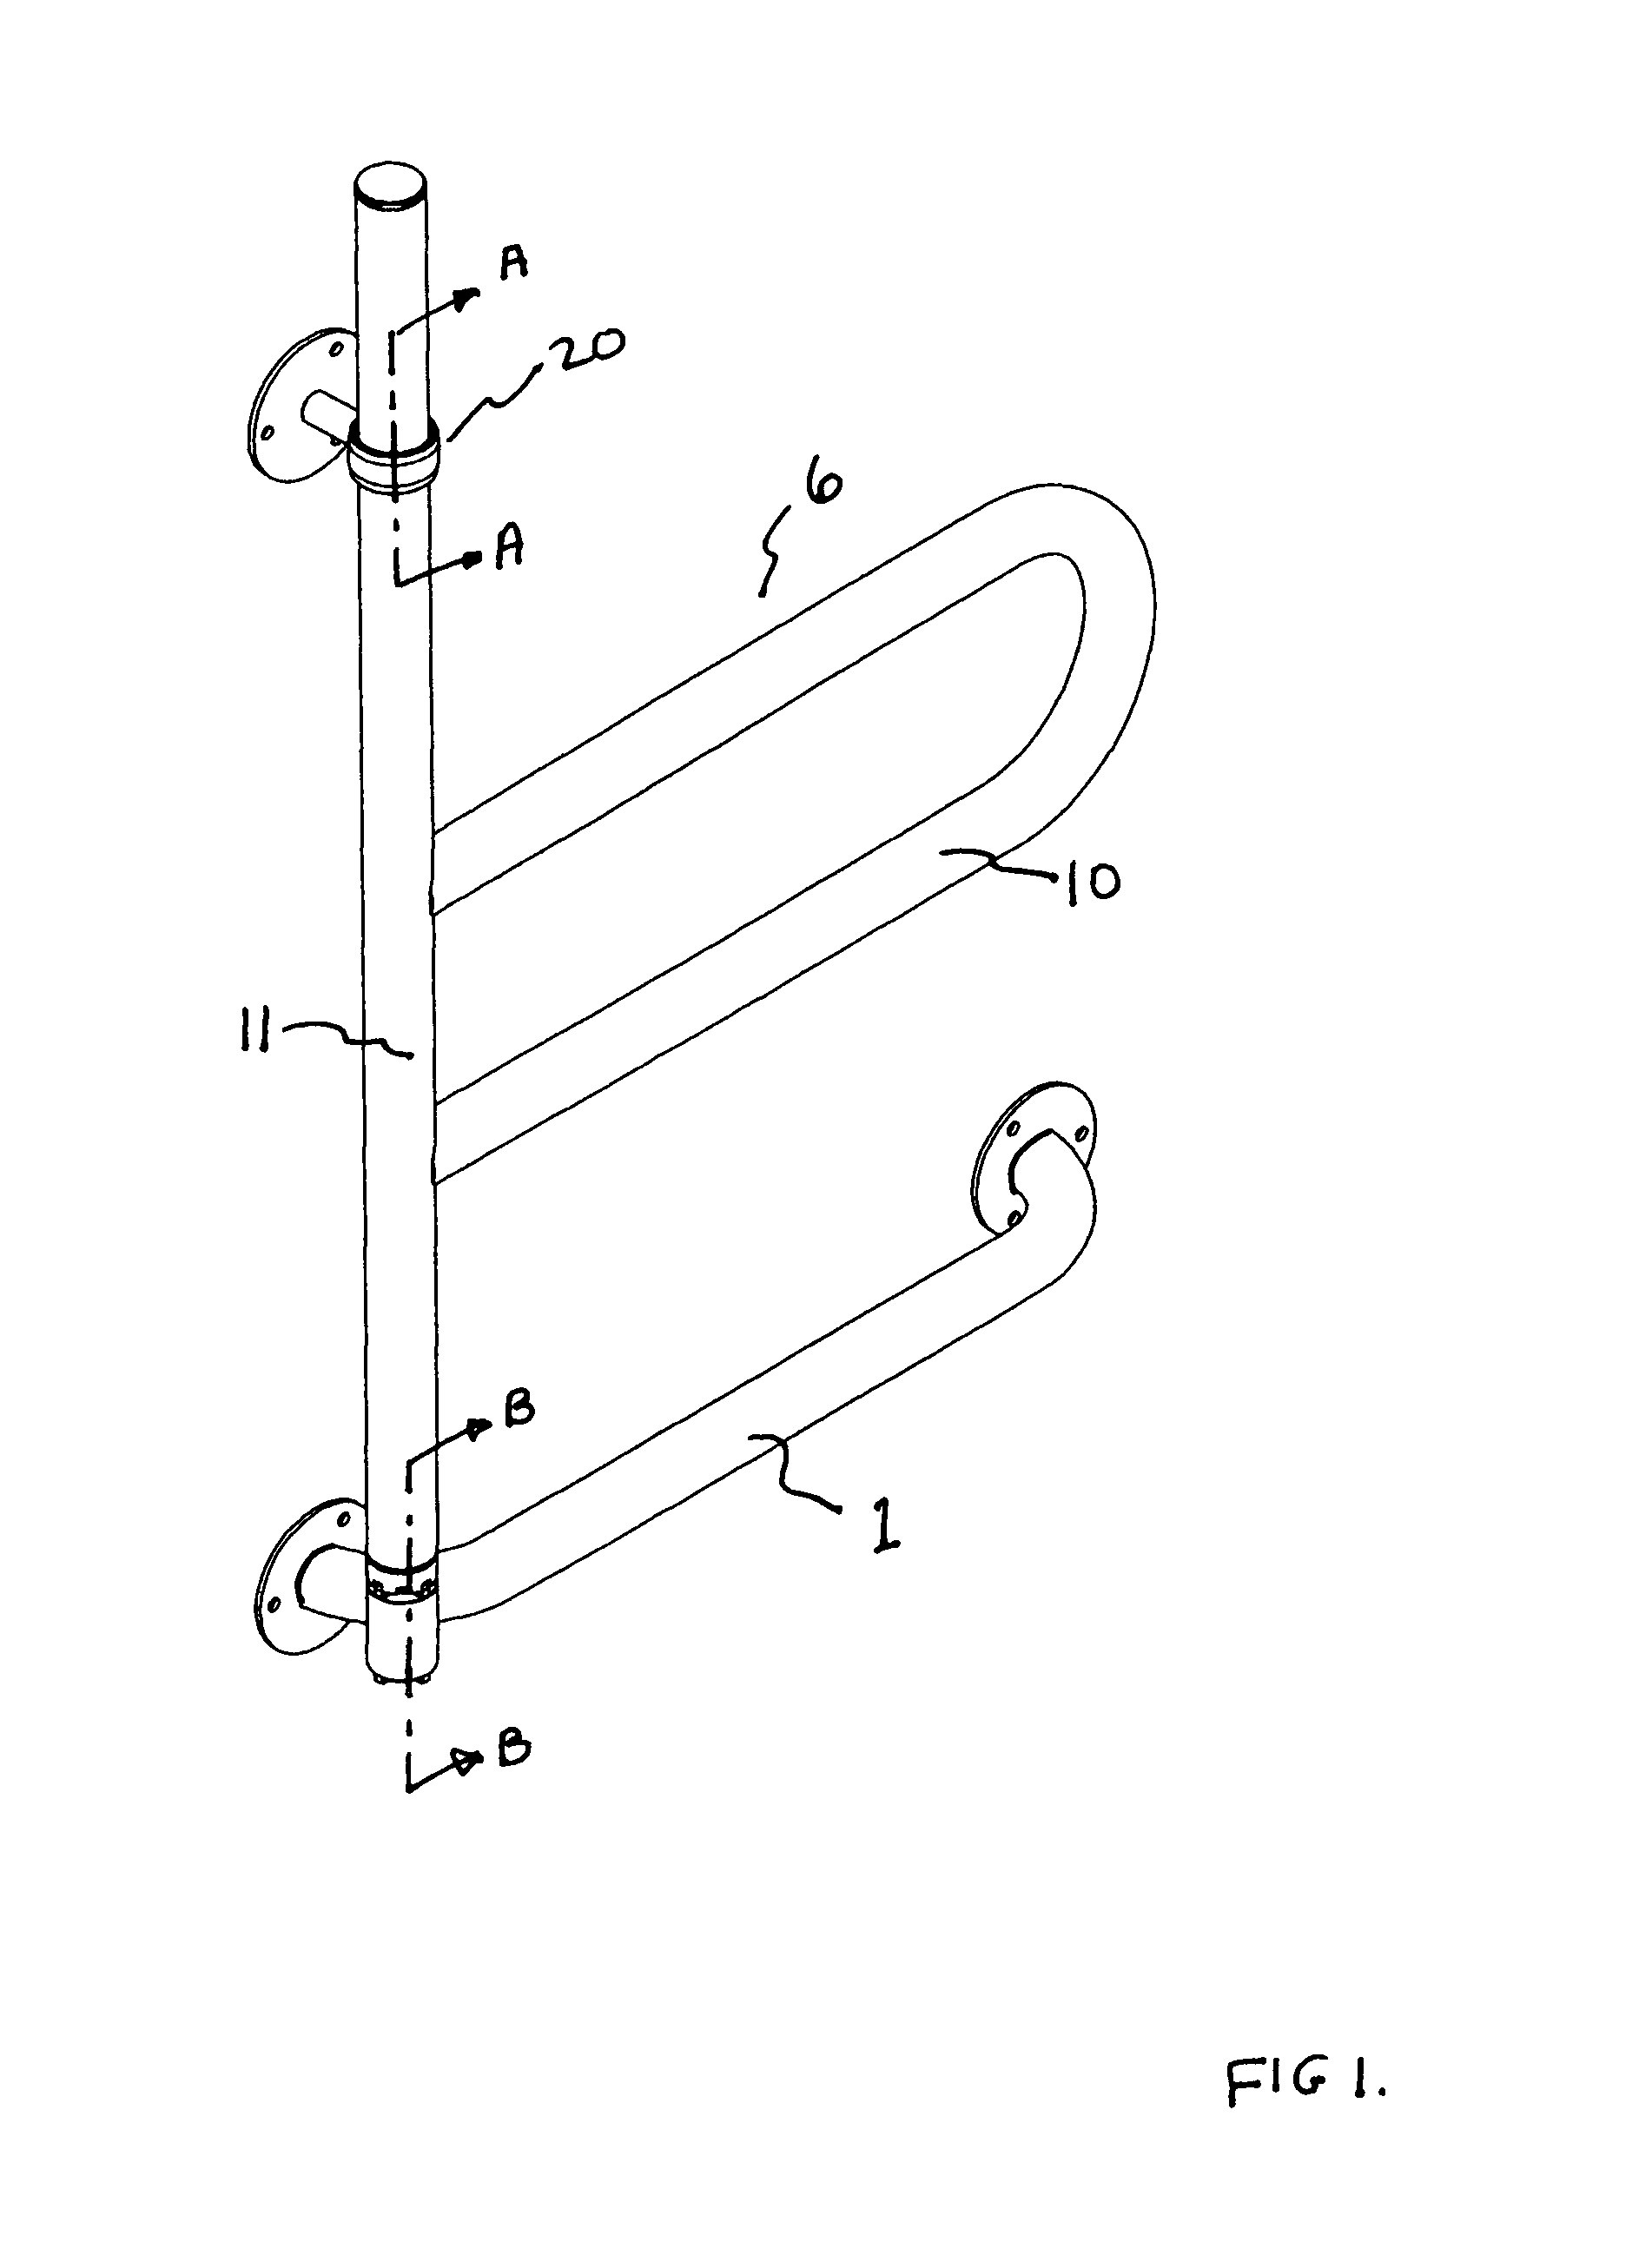 Pivoting and locking wall mounted support rail for elderly and disabled persons